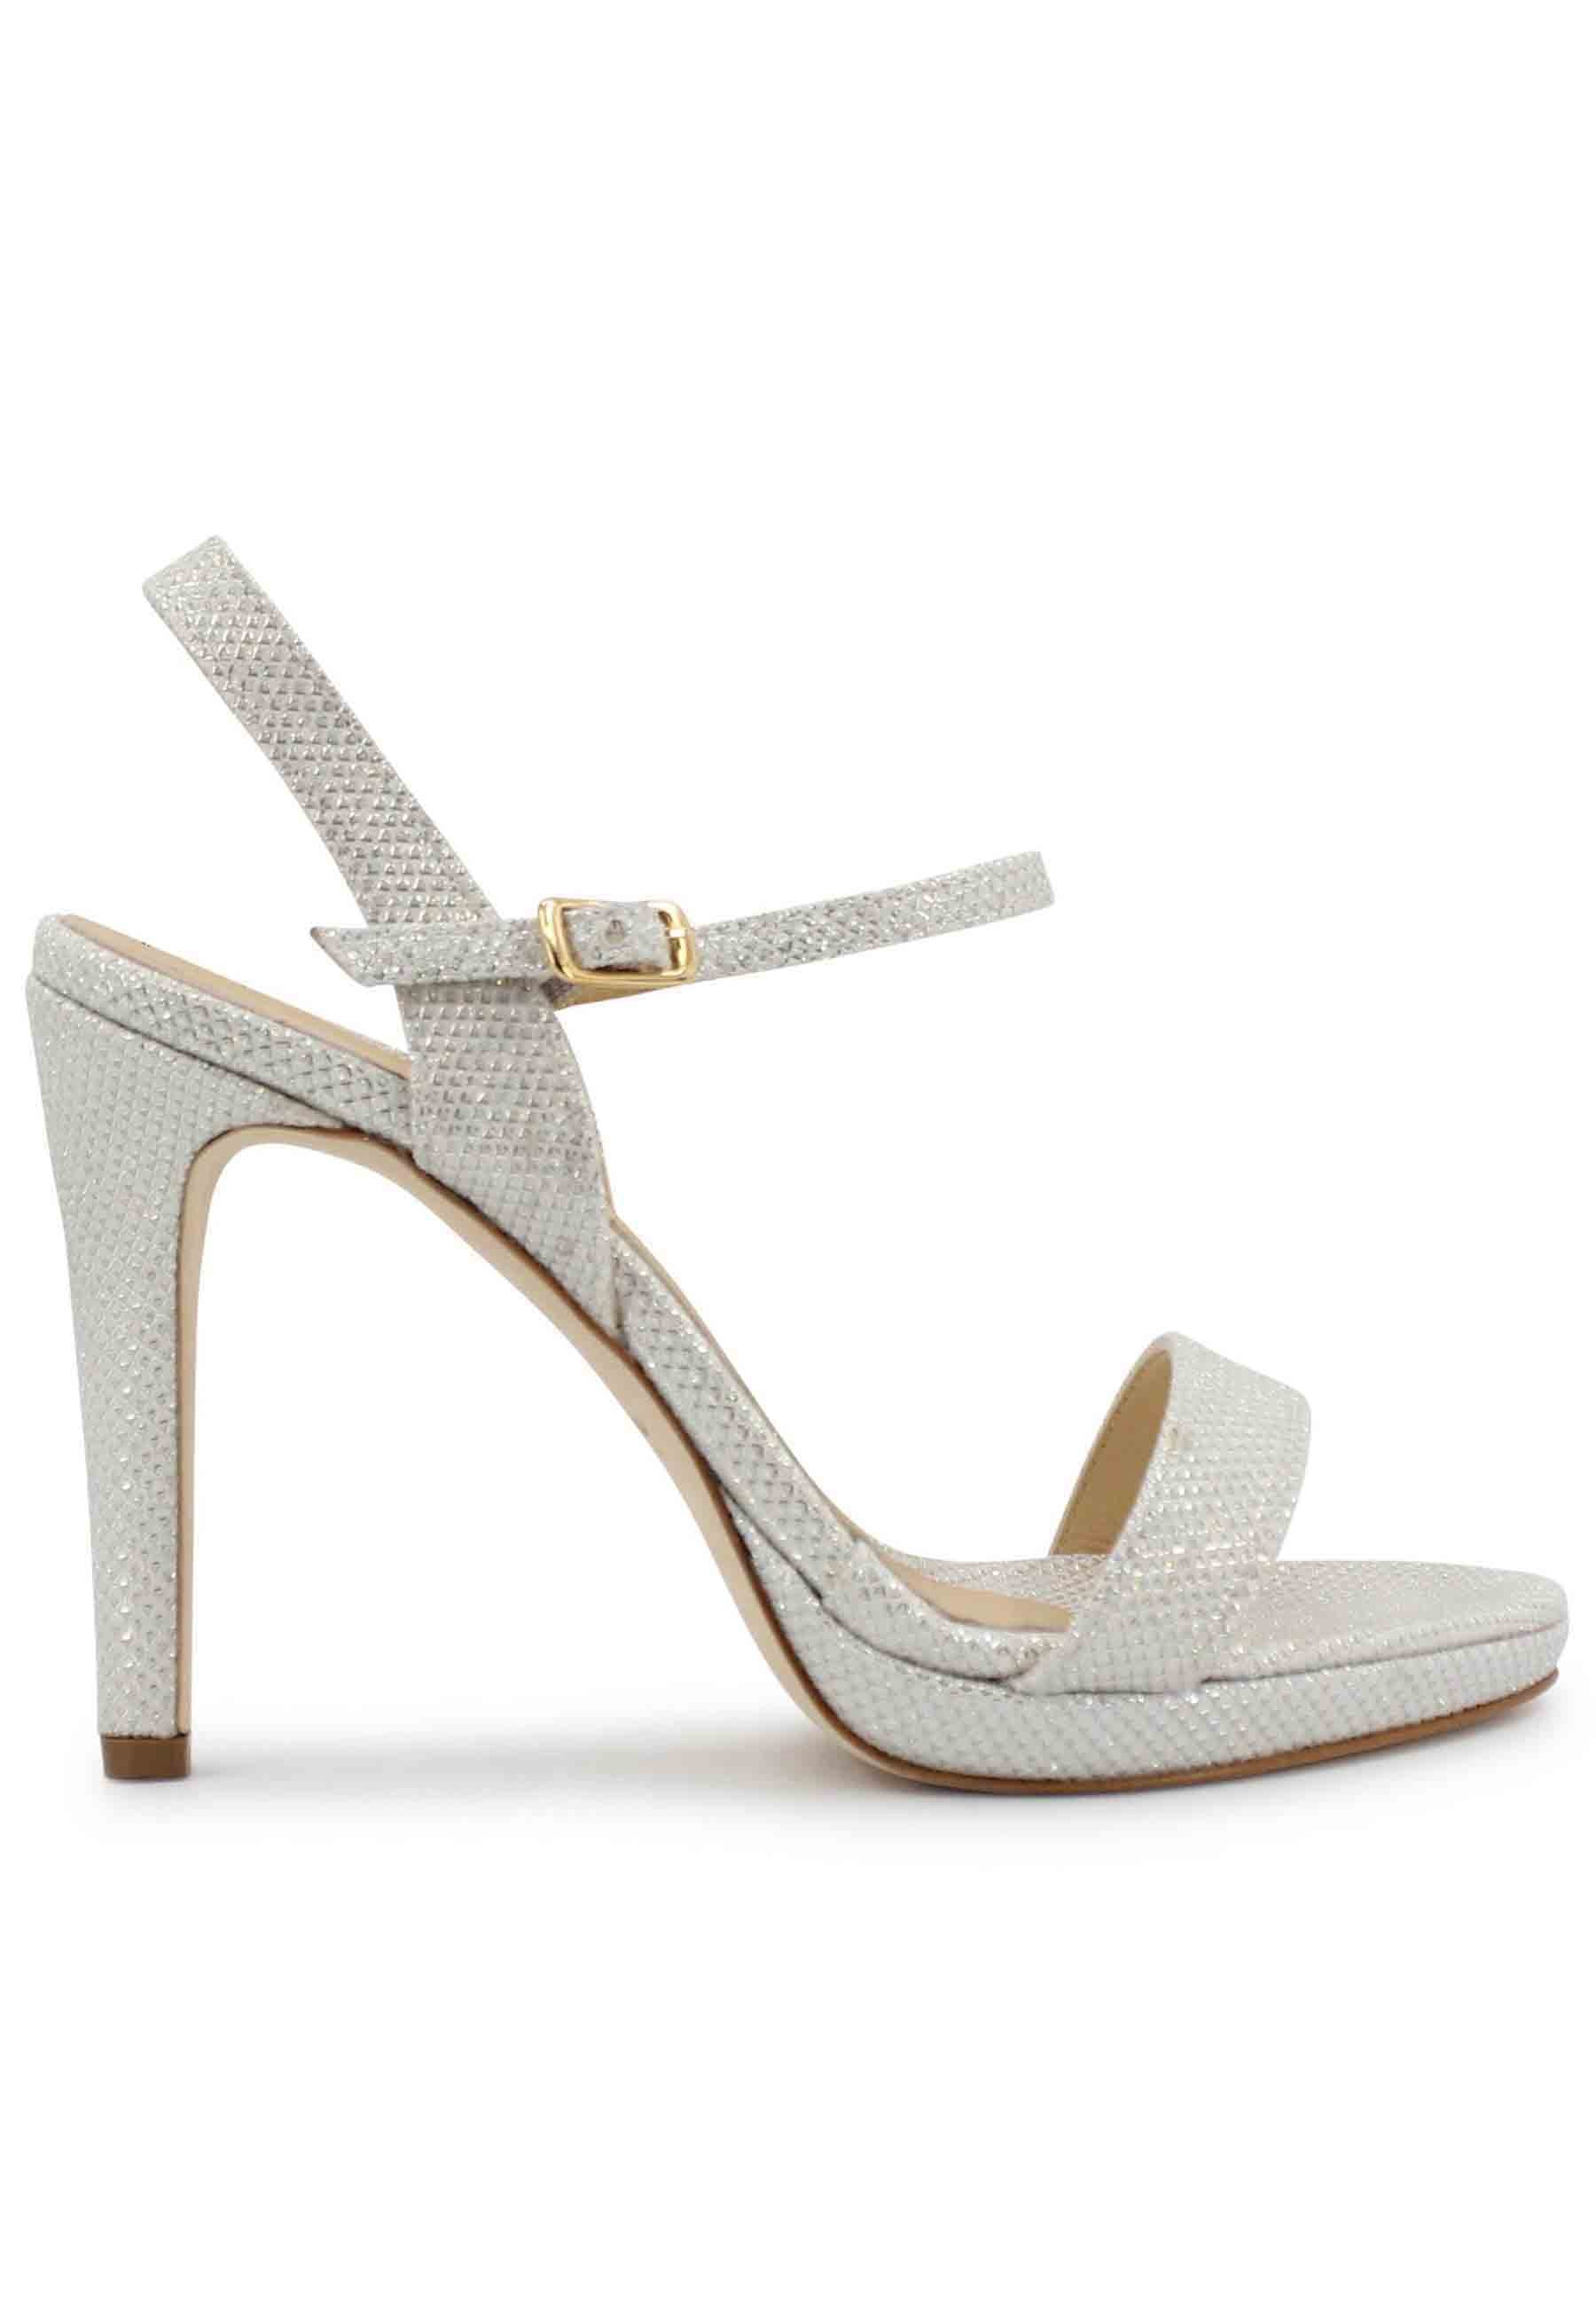 Women's white glitter sandals with high heel and ankle strap